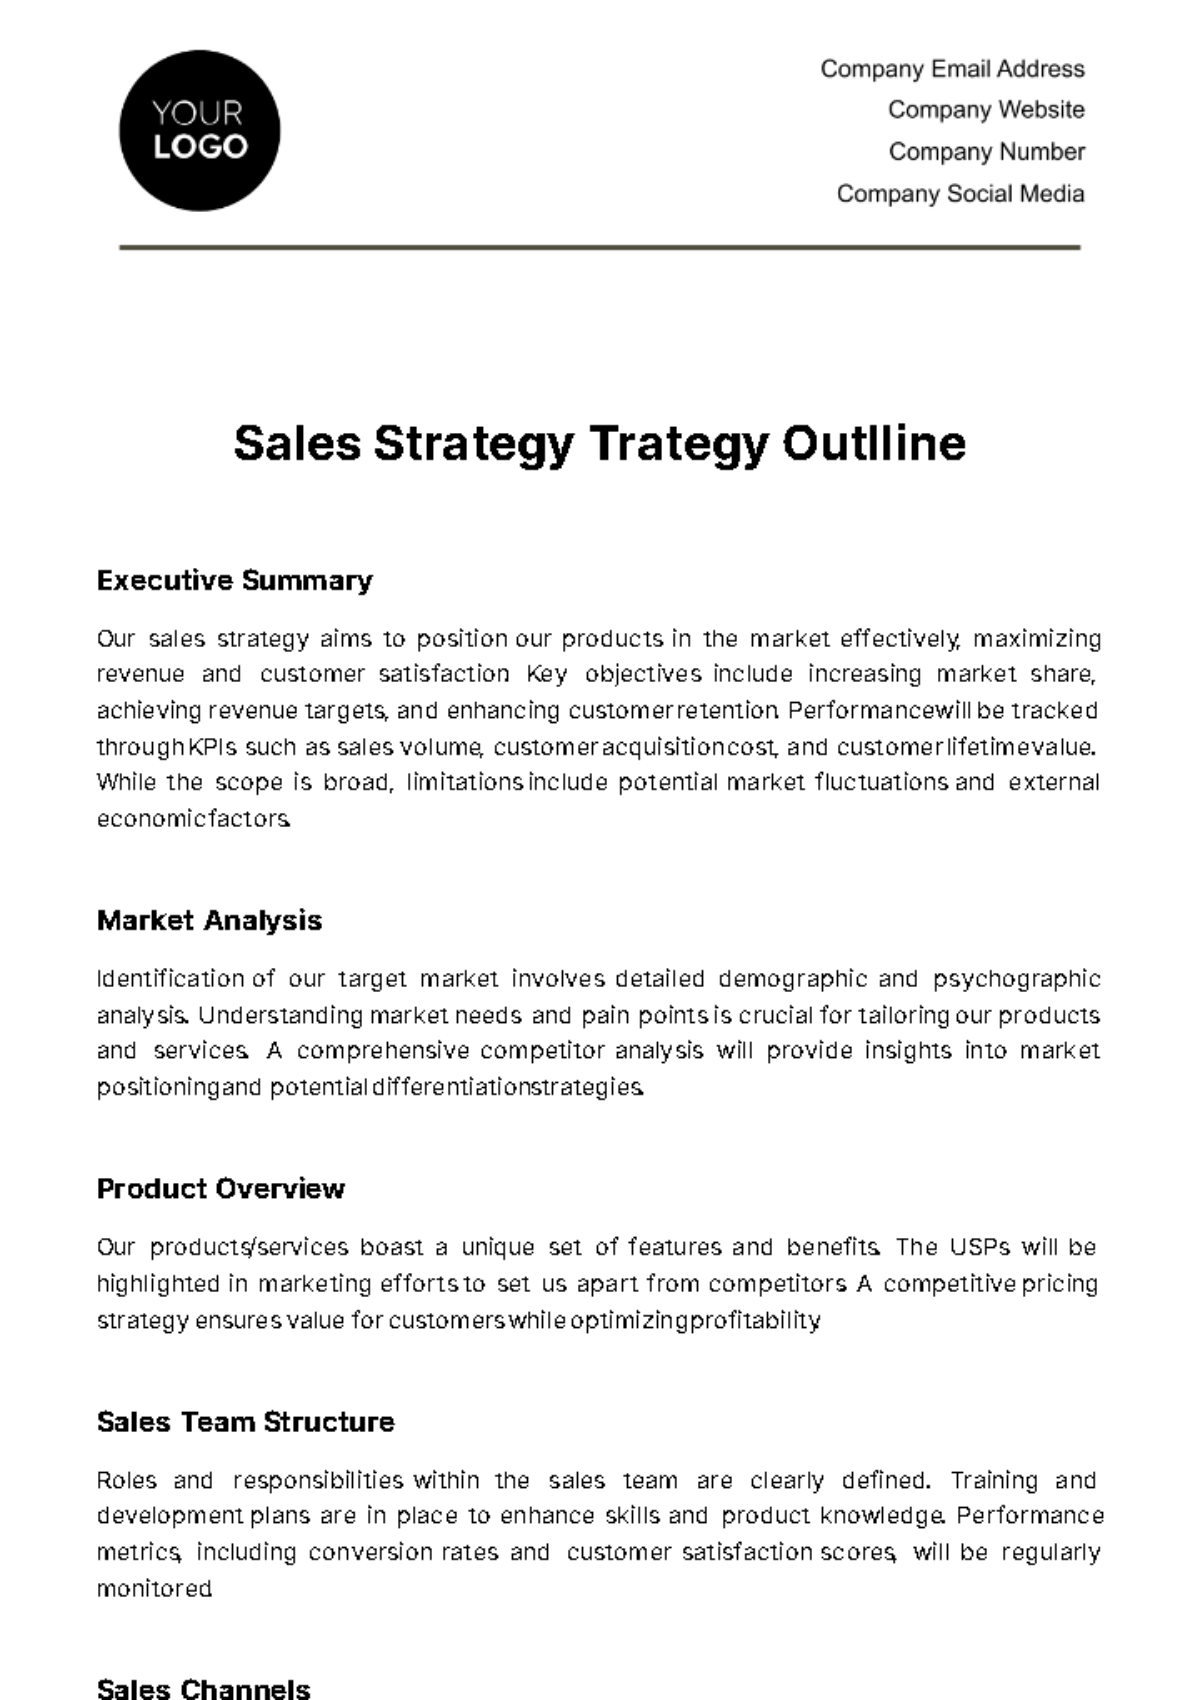 Free Sales Strategy Outline Template